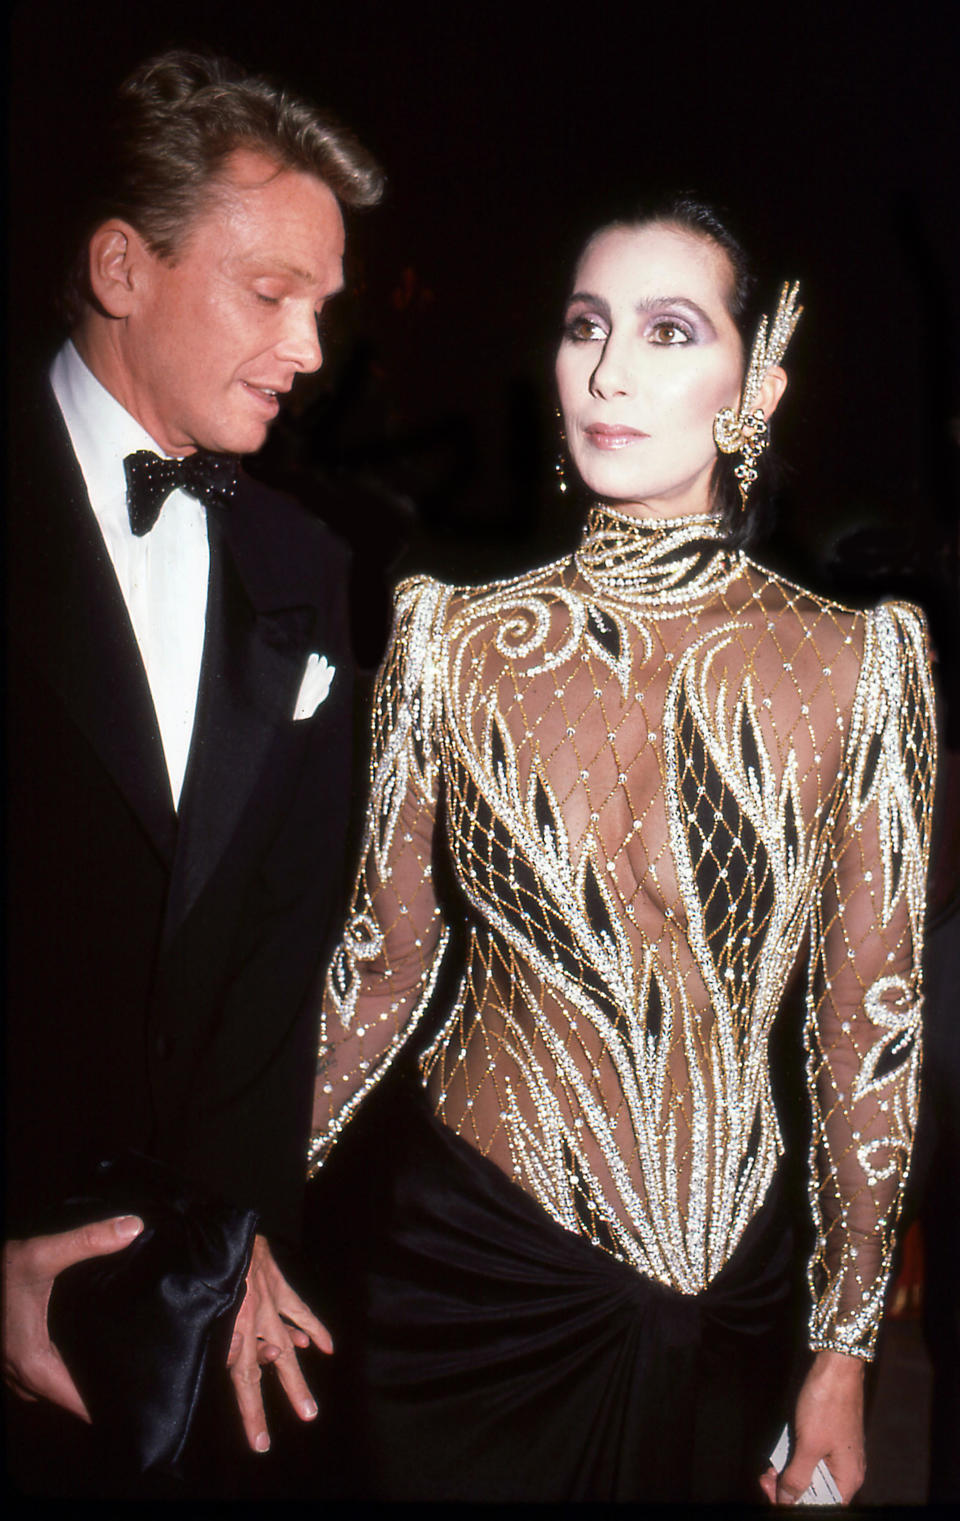 Designer Bob Mackie and the singer and actress Cher attend the Costume Institute Gala at the Metropolitan Museum of Art, New York, New York, 1985. / Credit: Rose Hartman/Getty Images